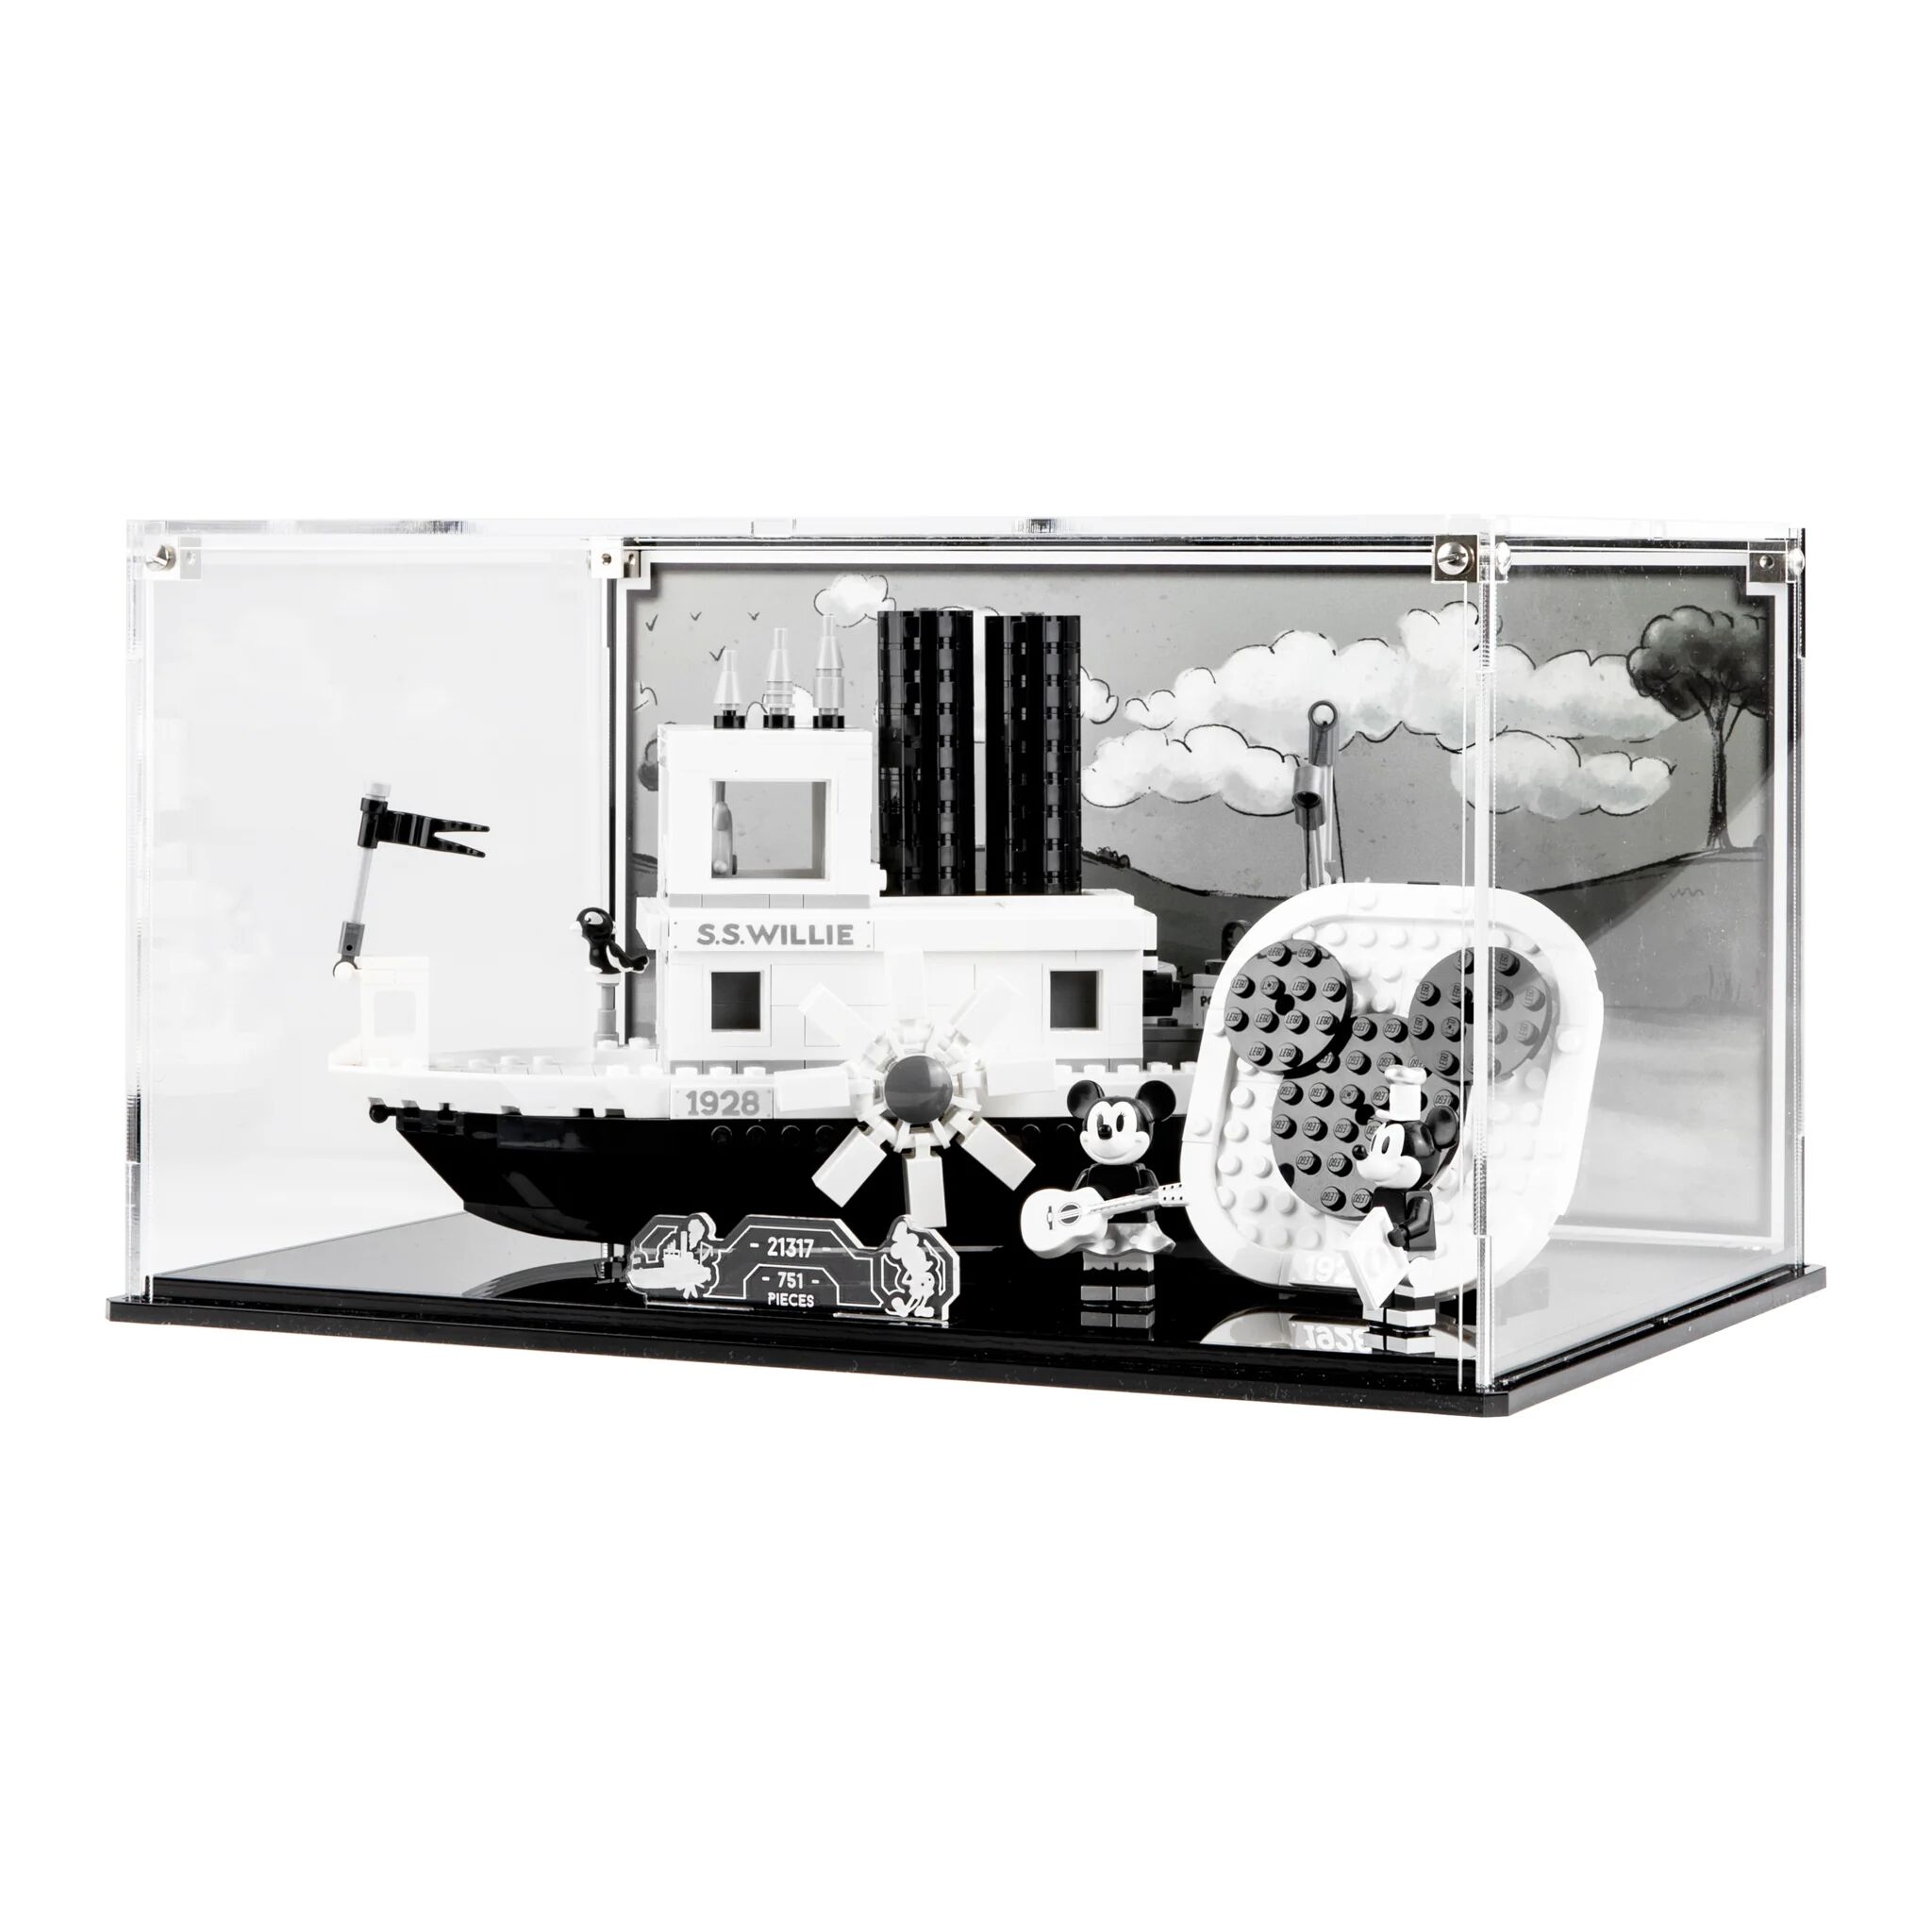 Wicked Brick Display case for LEGO® Ideas: Steamboat Willie (21317) - Printed Background